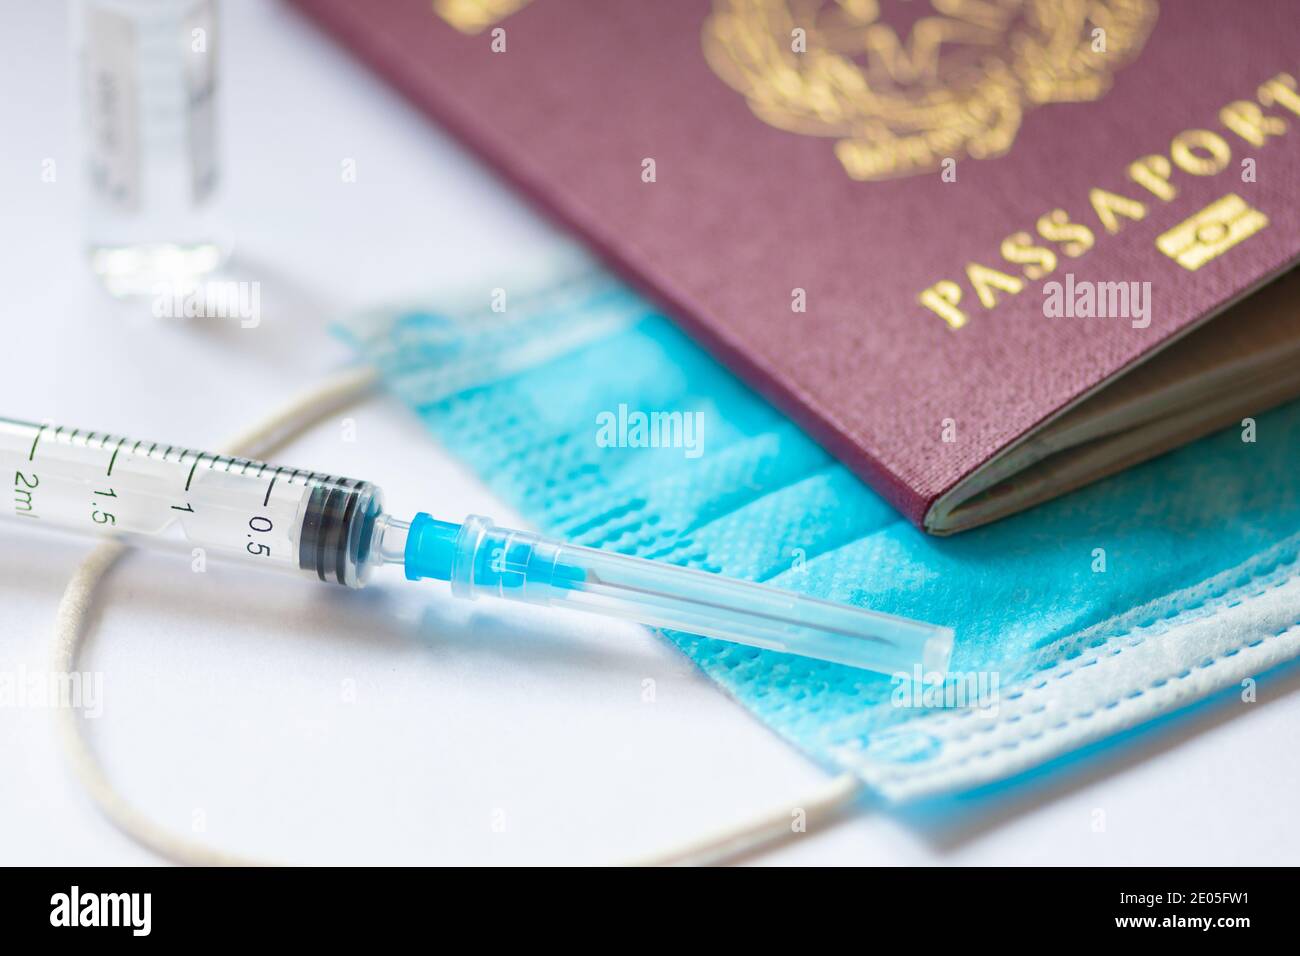 Syringe with needle, vial, surgical face mask and passport or visa on the table ready to be used. Covid or Coronavirus vaccine background Stock Photo